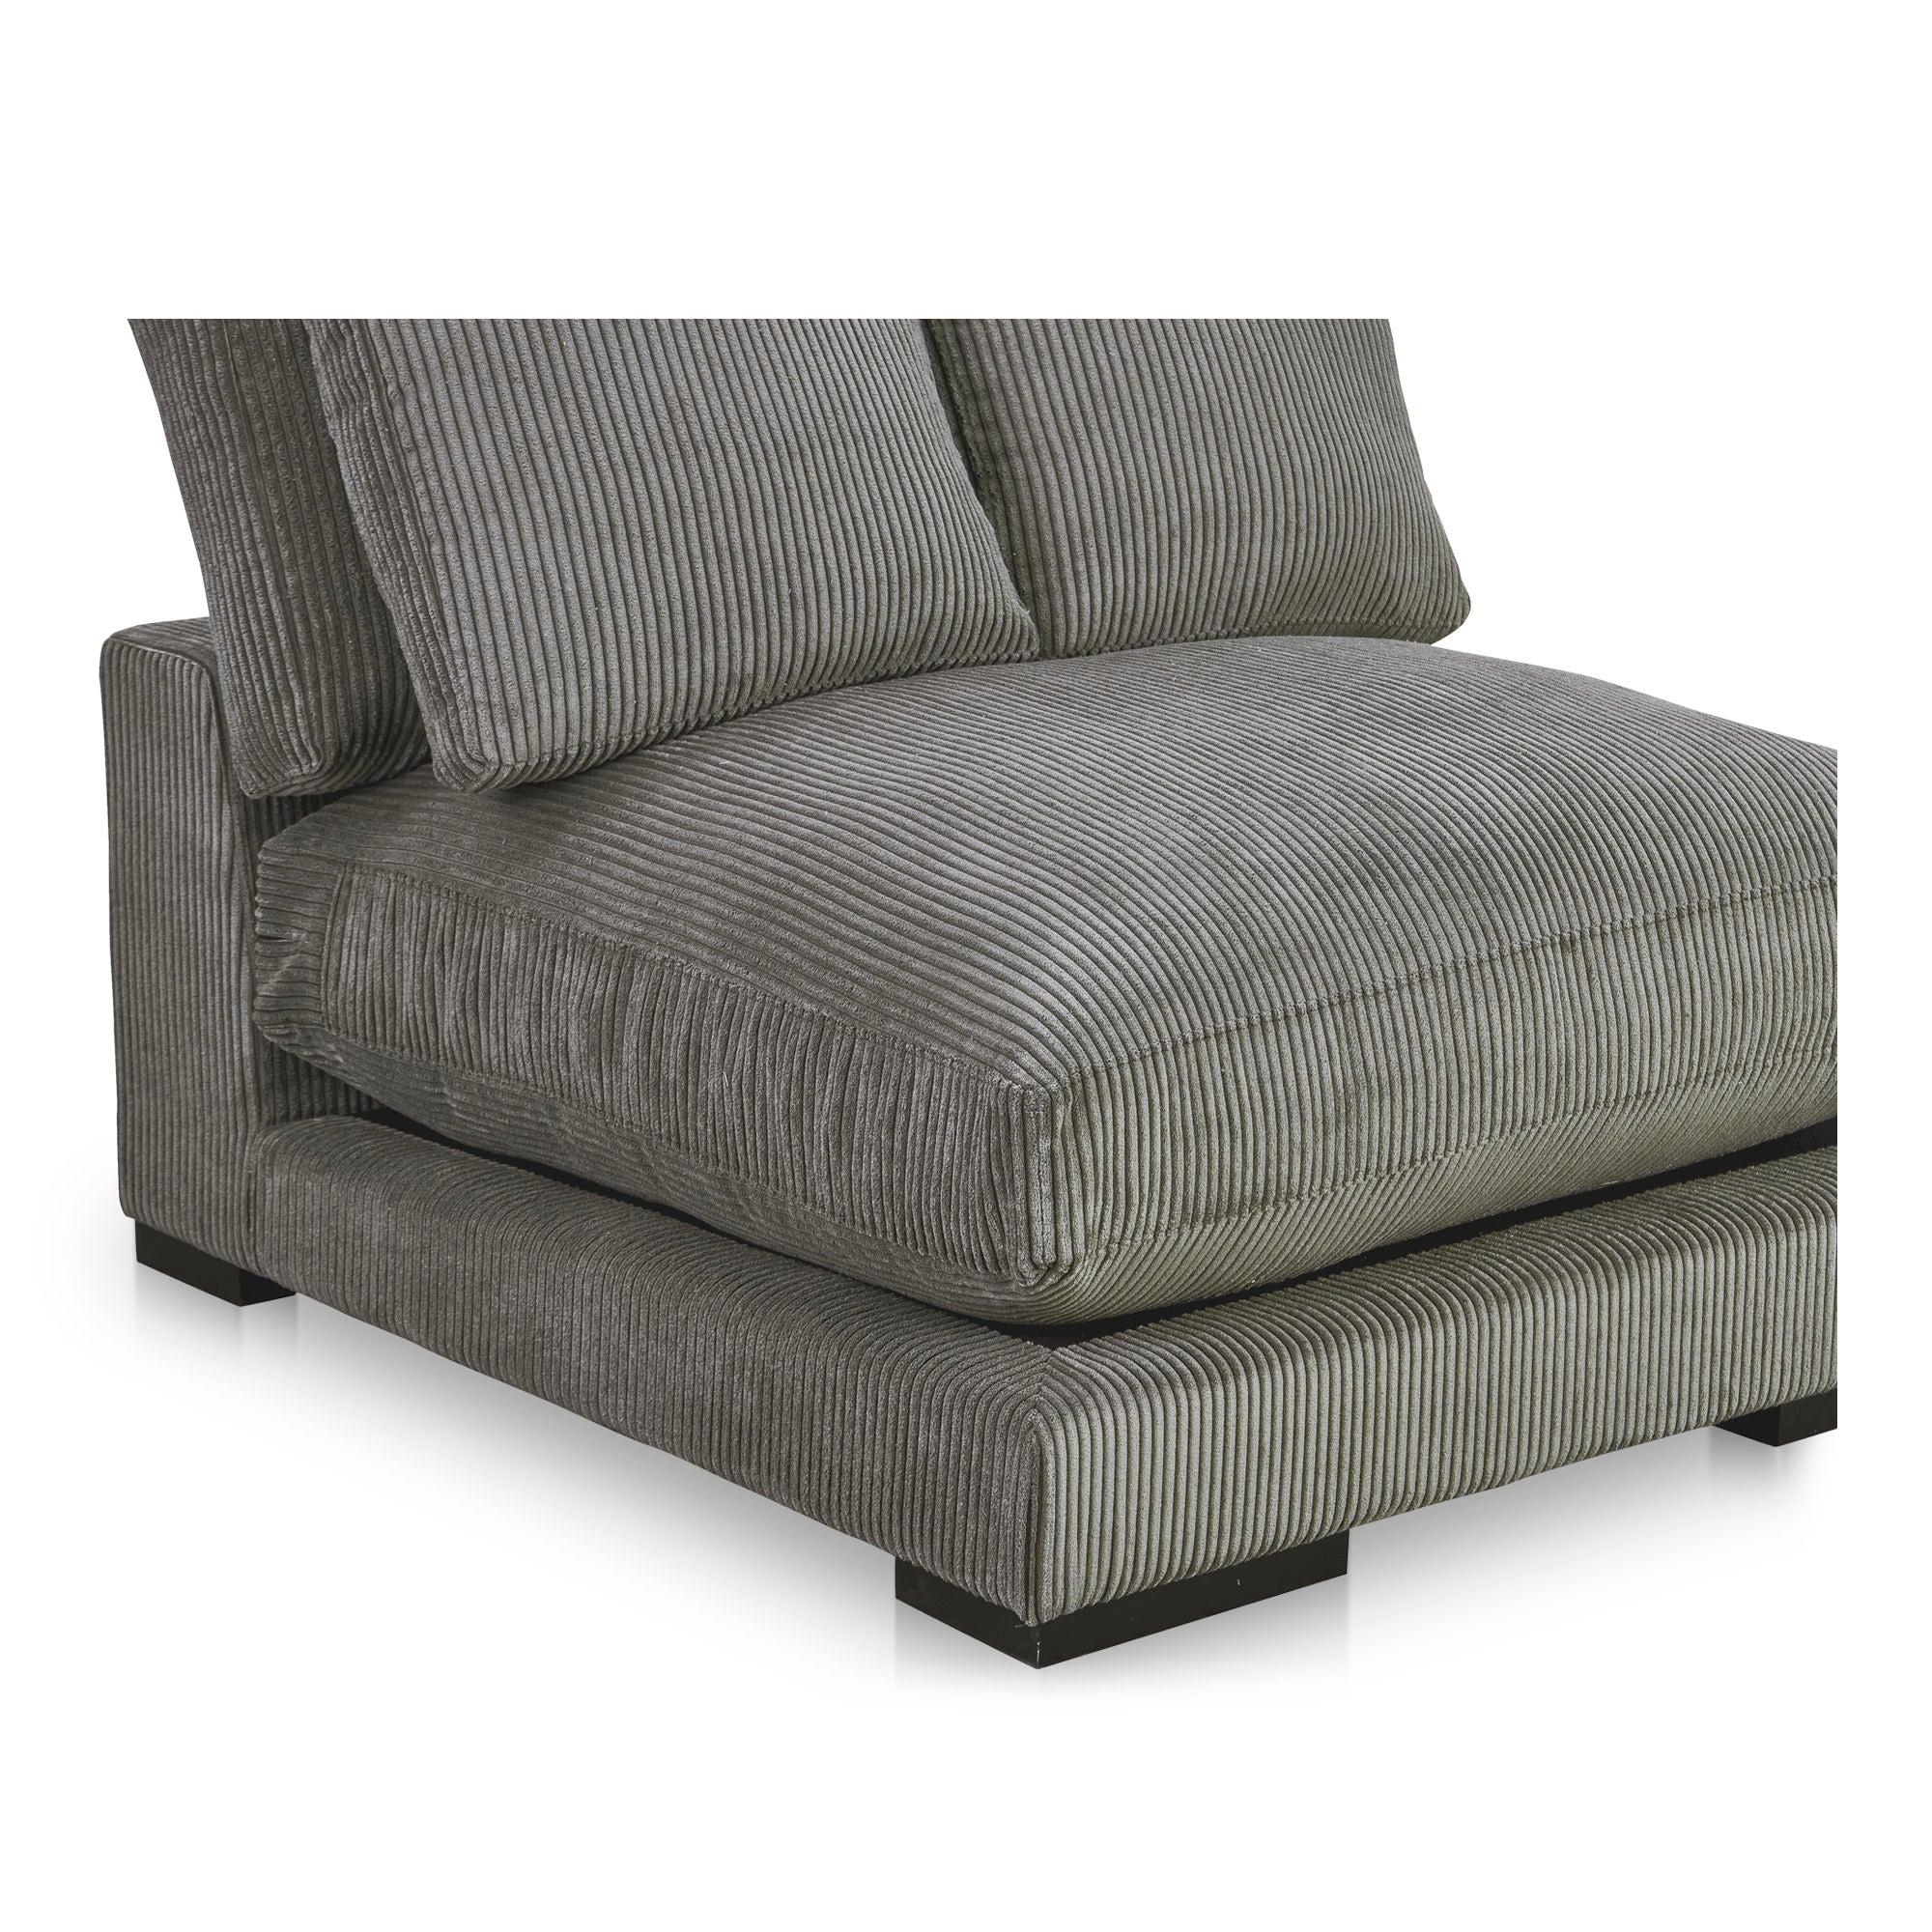 Plunge - Slipper Chair - Charcoal